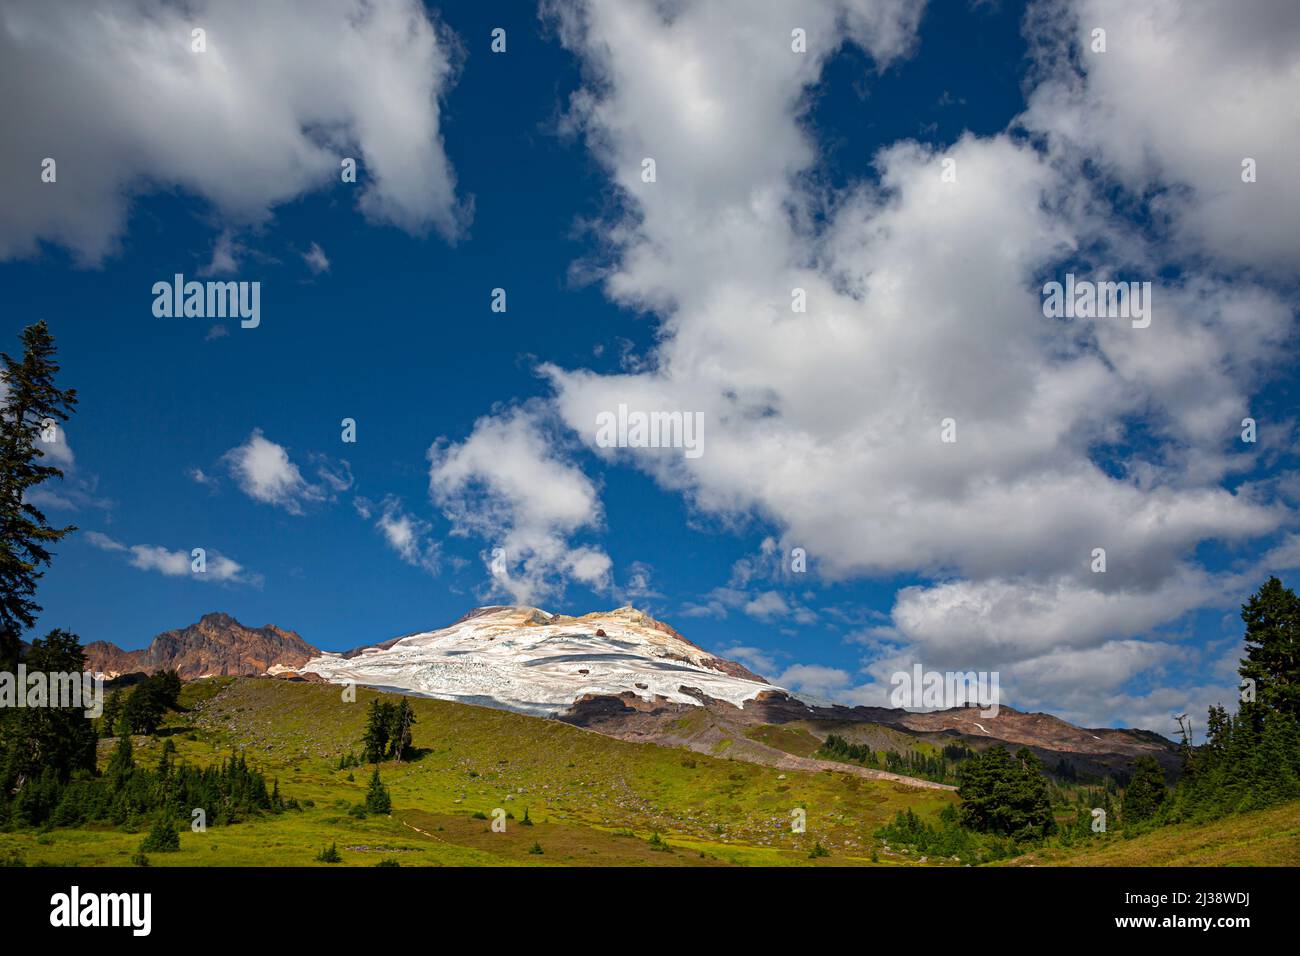 WA21327-00...WASHINGTON - Meadows below the Railroad Grade leading to Easton Glacier and the summit of Mount Baker in the Mount Baker National Recreat Stock Photo